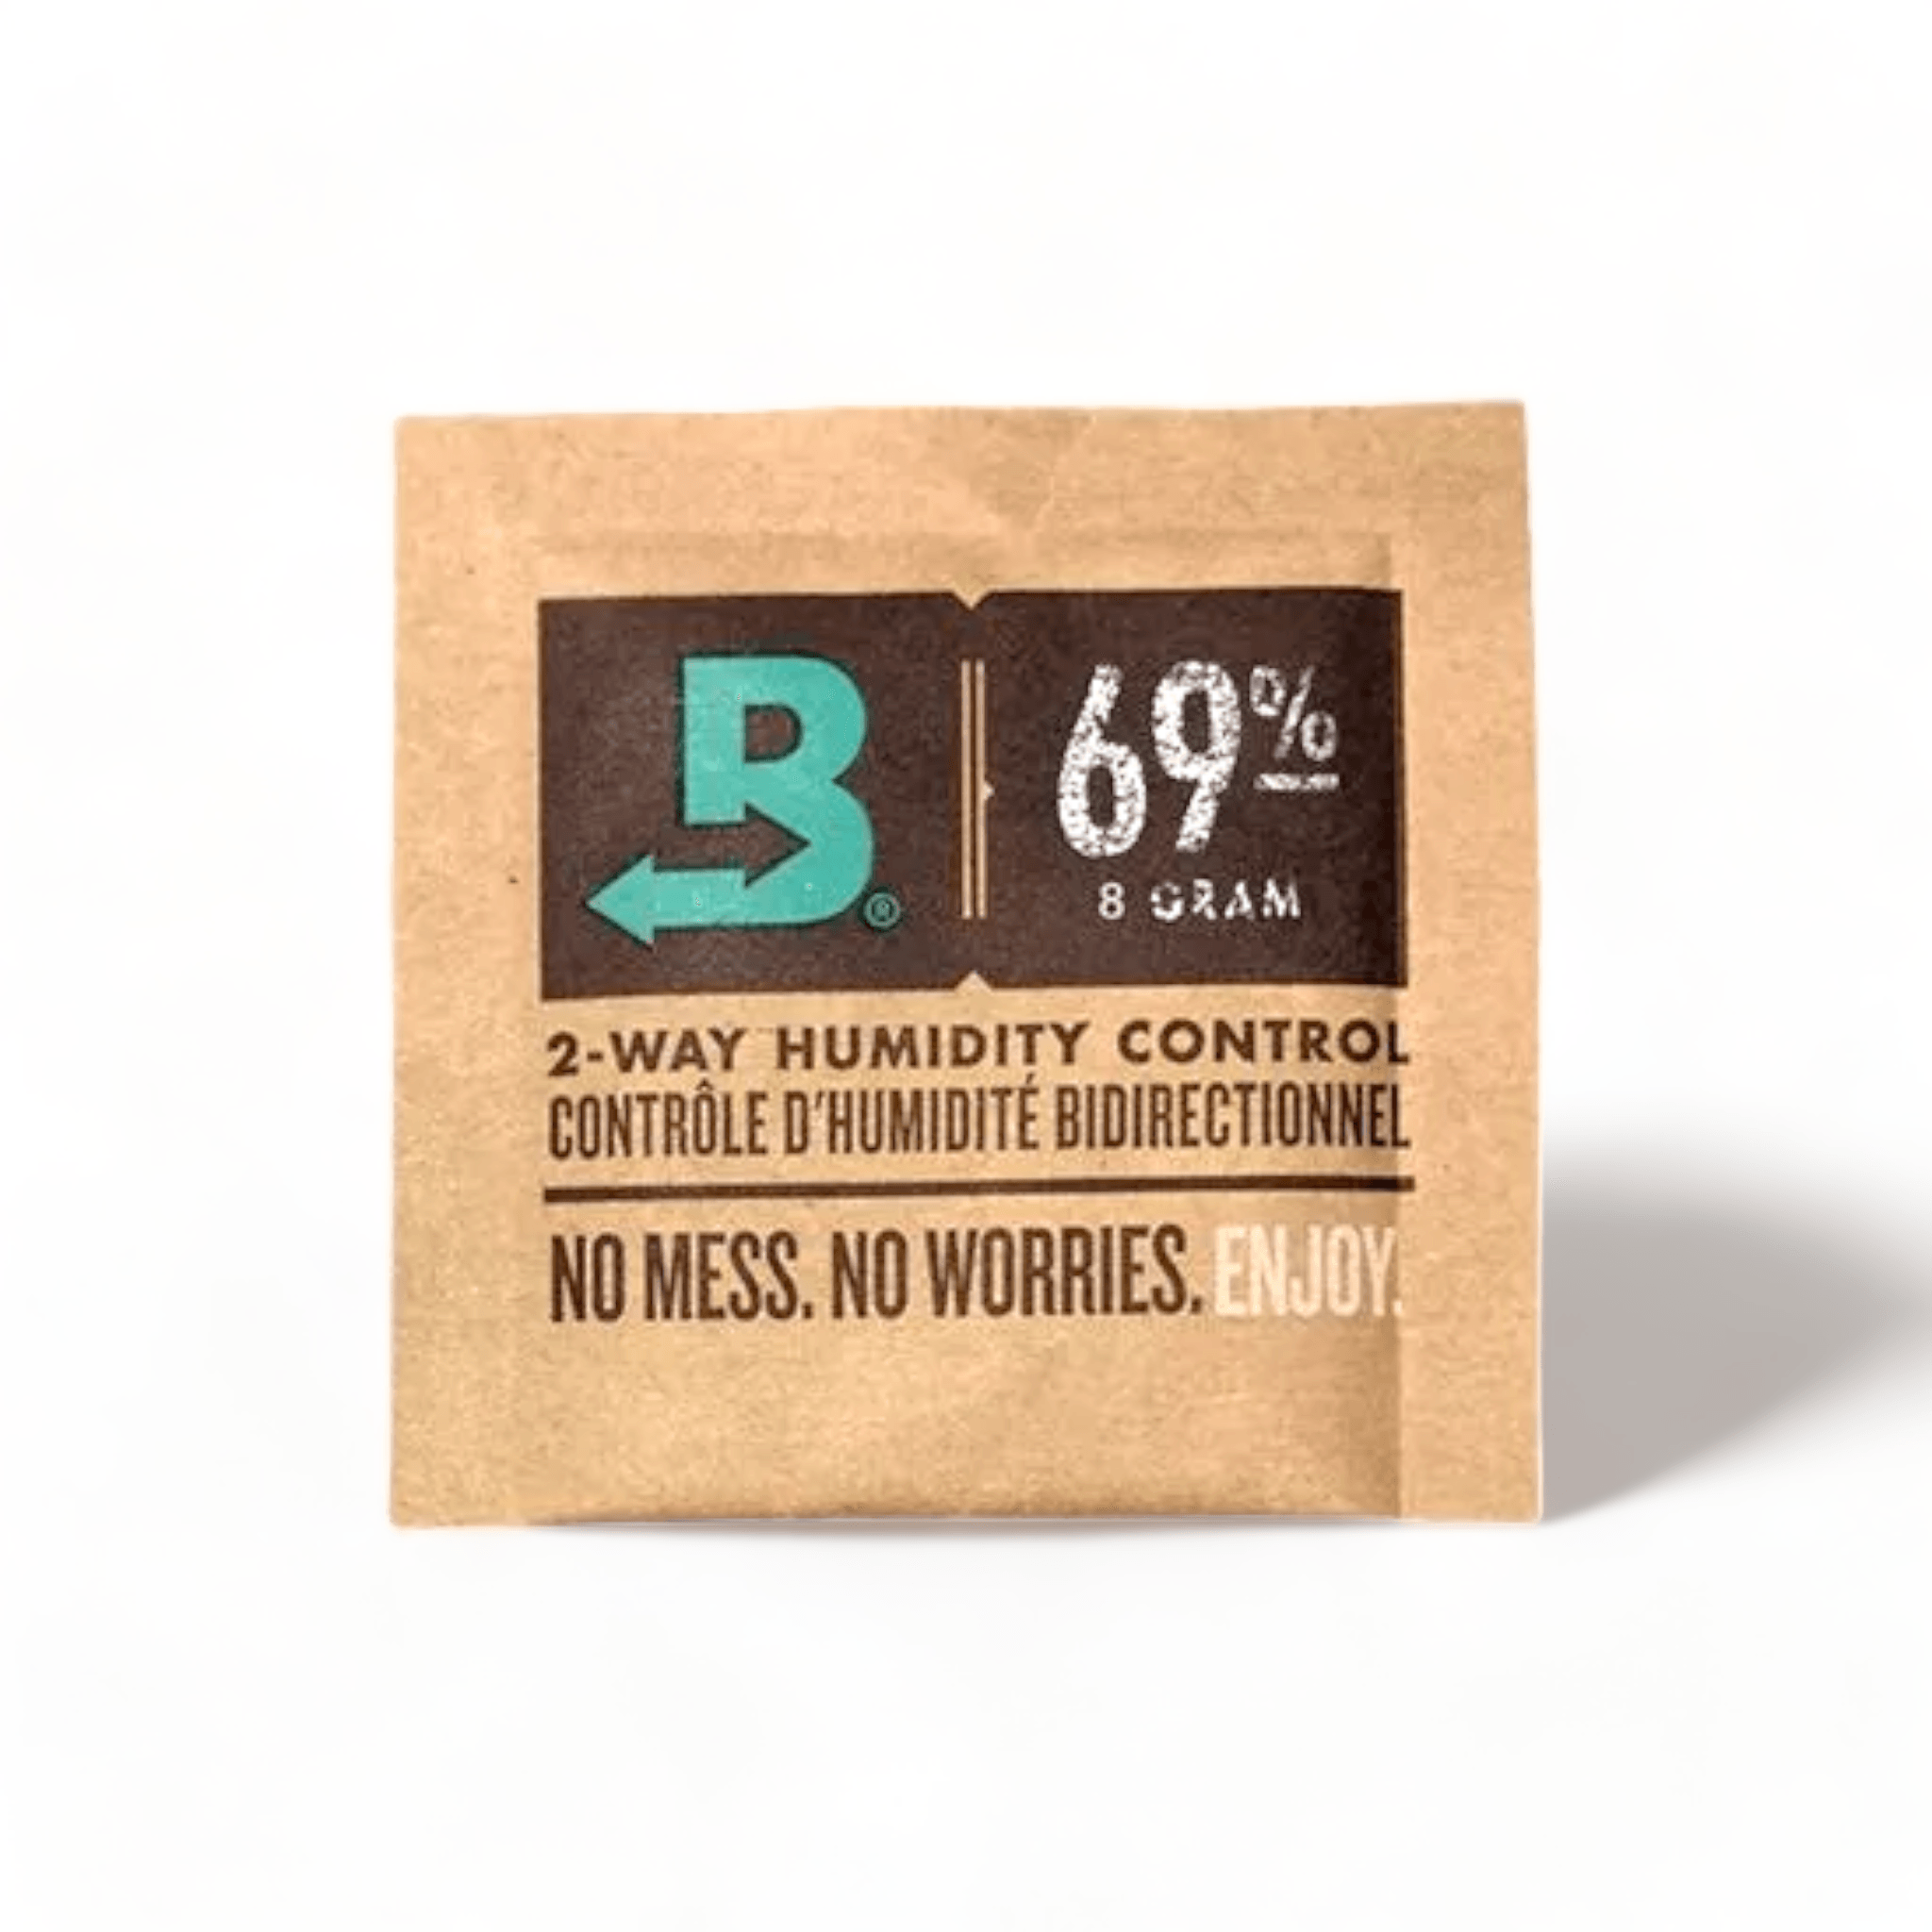 Boveda Accessories | Humidity Pack 69% 8 grams | 1pc - hk.cohcigars